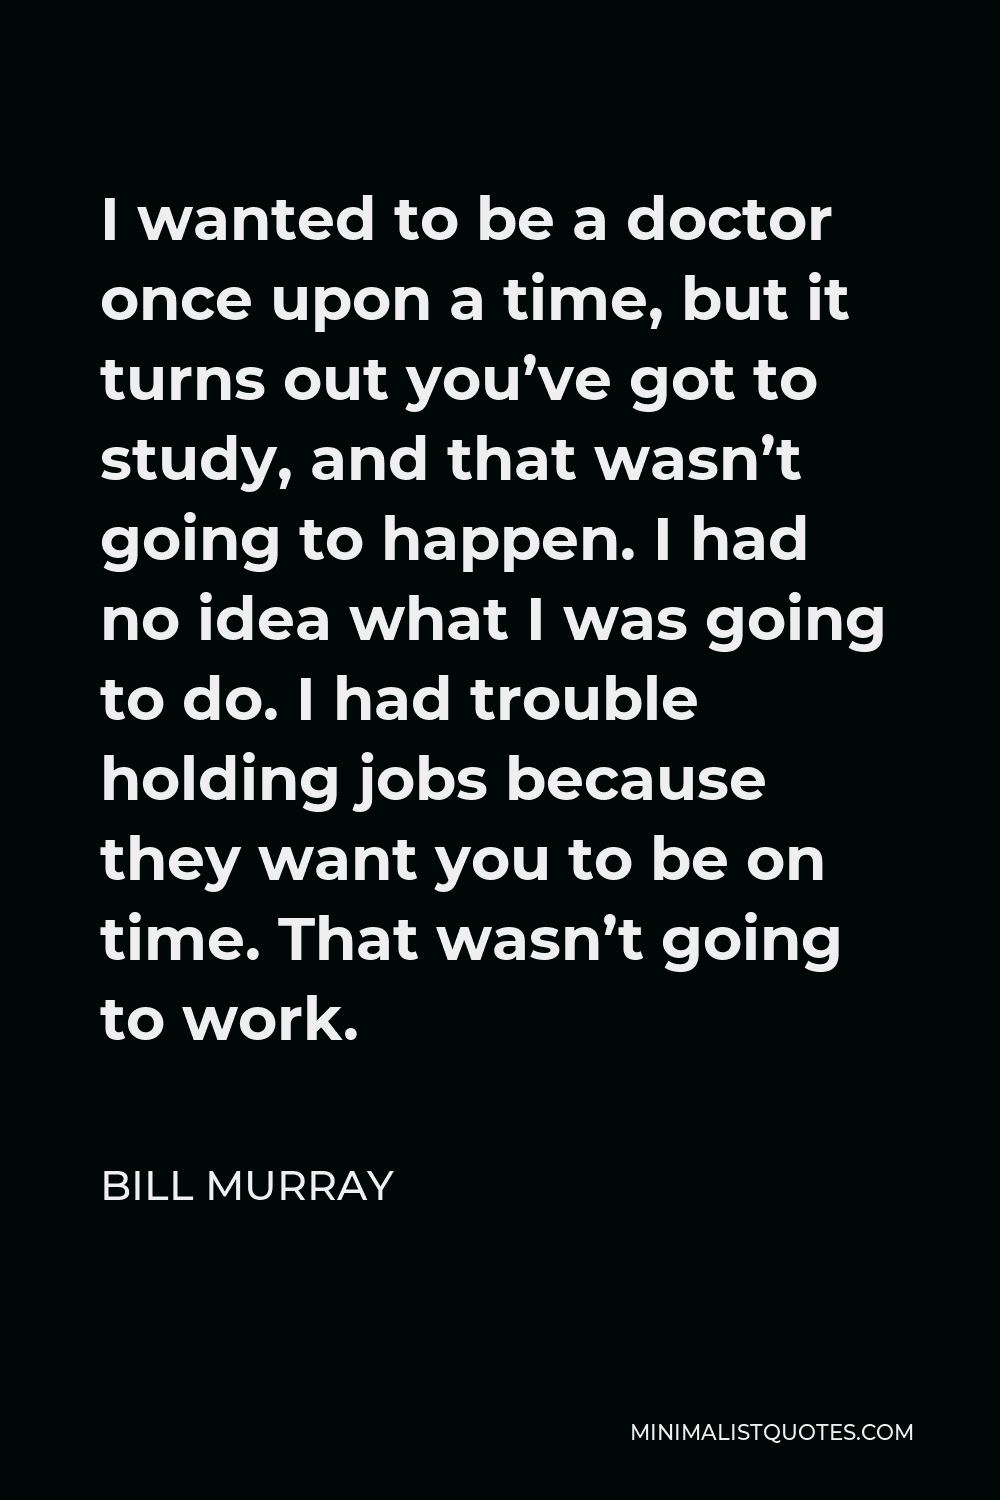 Bill Murray Quote - I wanted to be a doctor once upon a time, but it turns out you’ve got to study, and that wasn’t going to happen. I had no idea what I was going to do. I had trouble holding jobs because they want you to be on time. That wasn’t going to work.